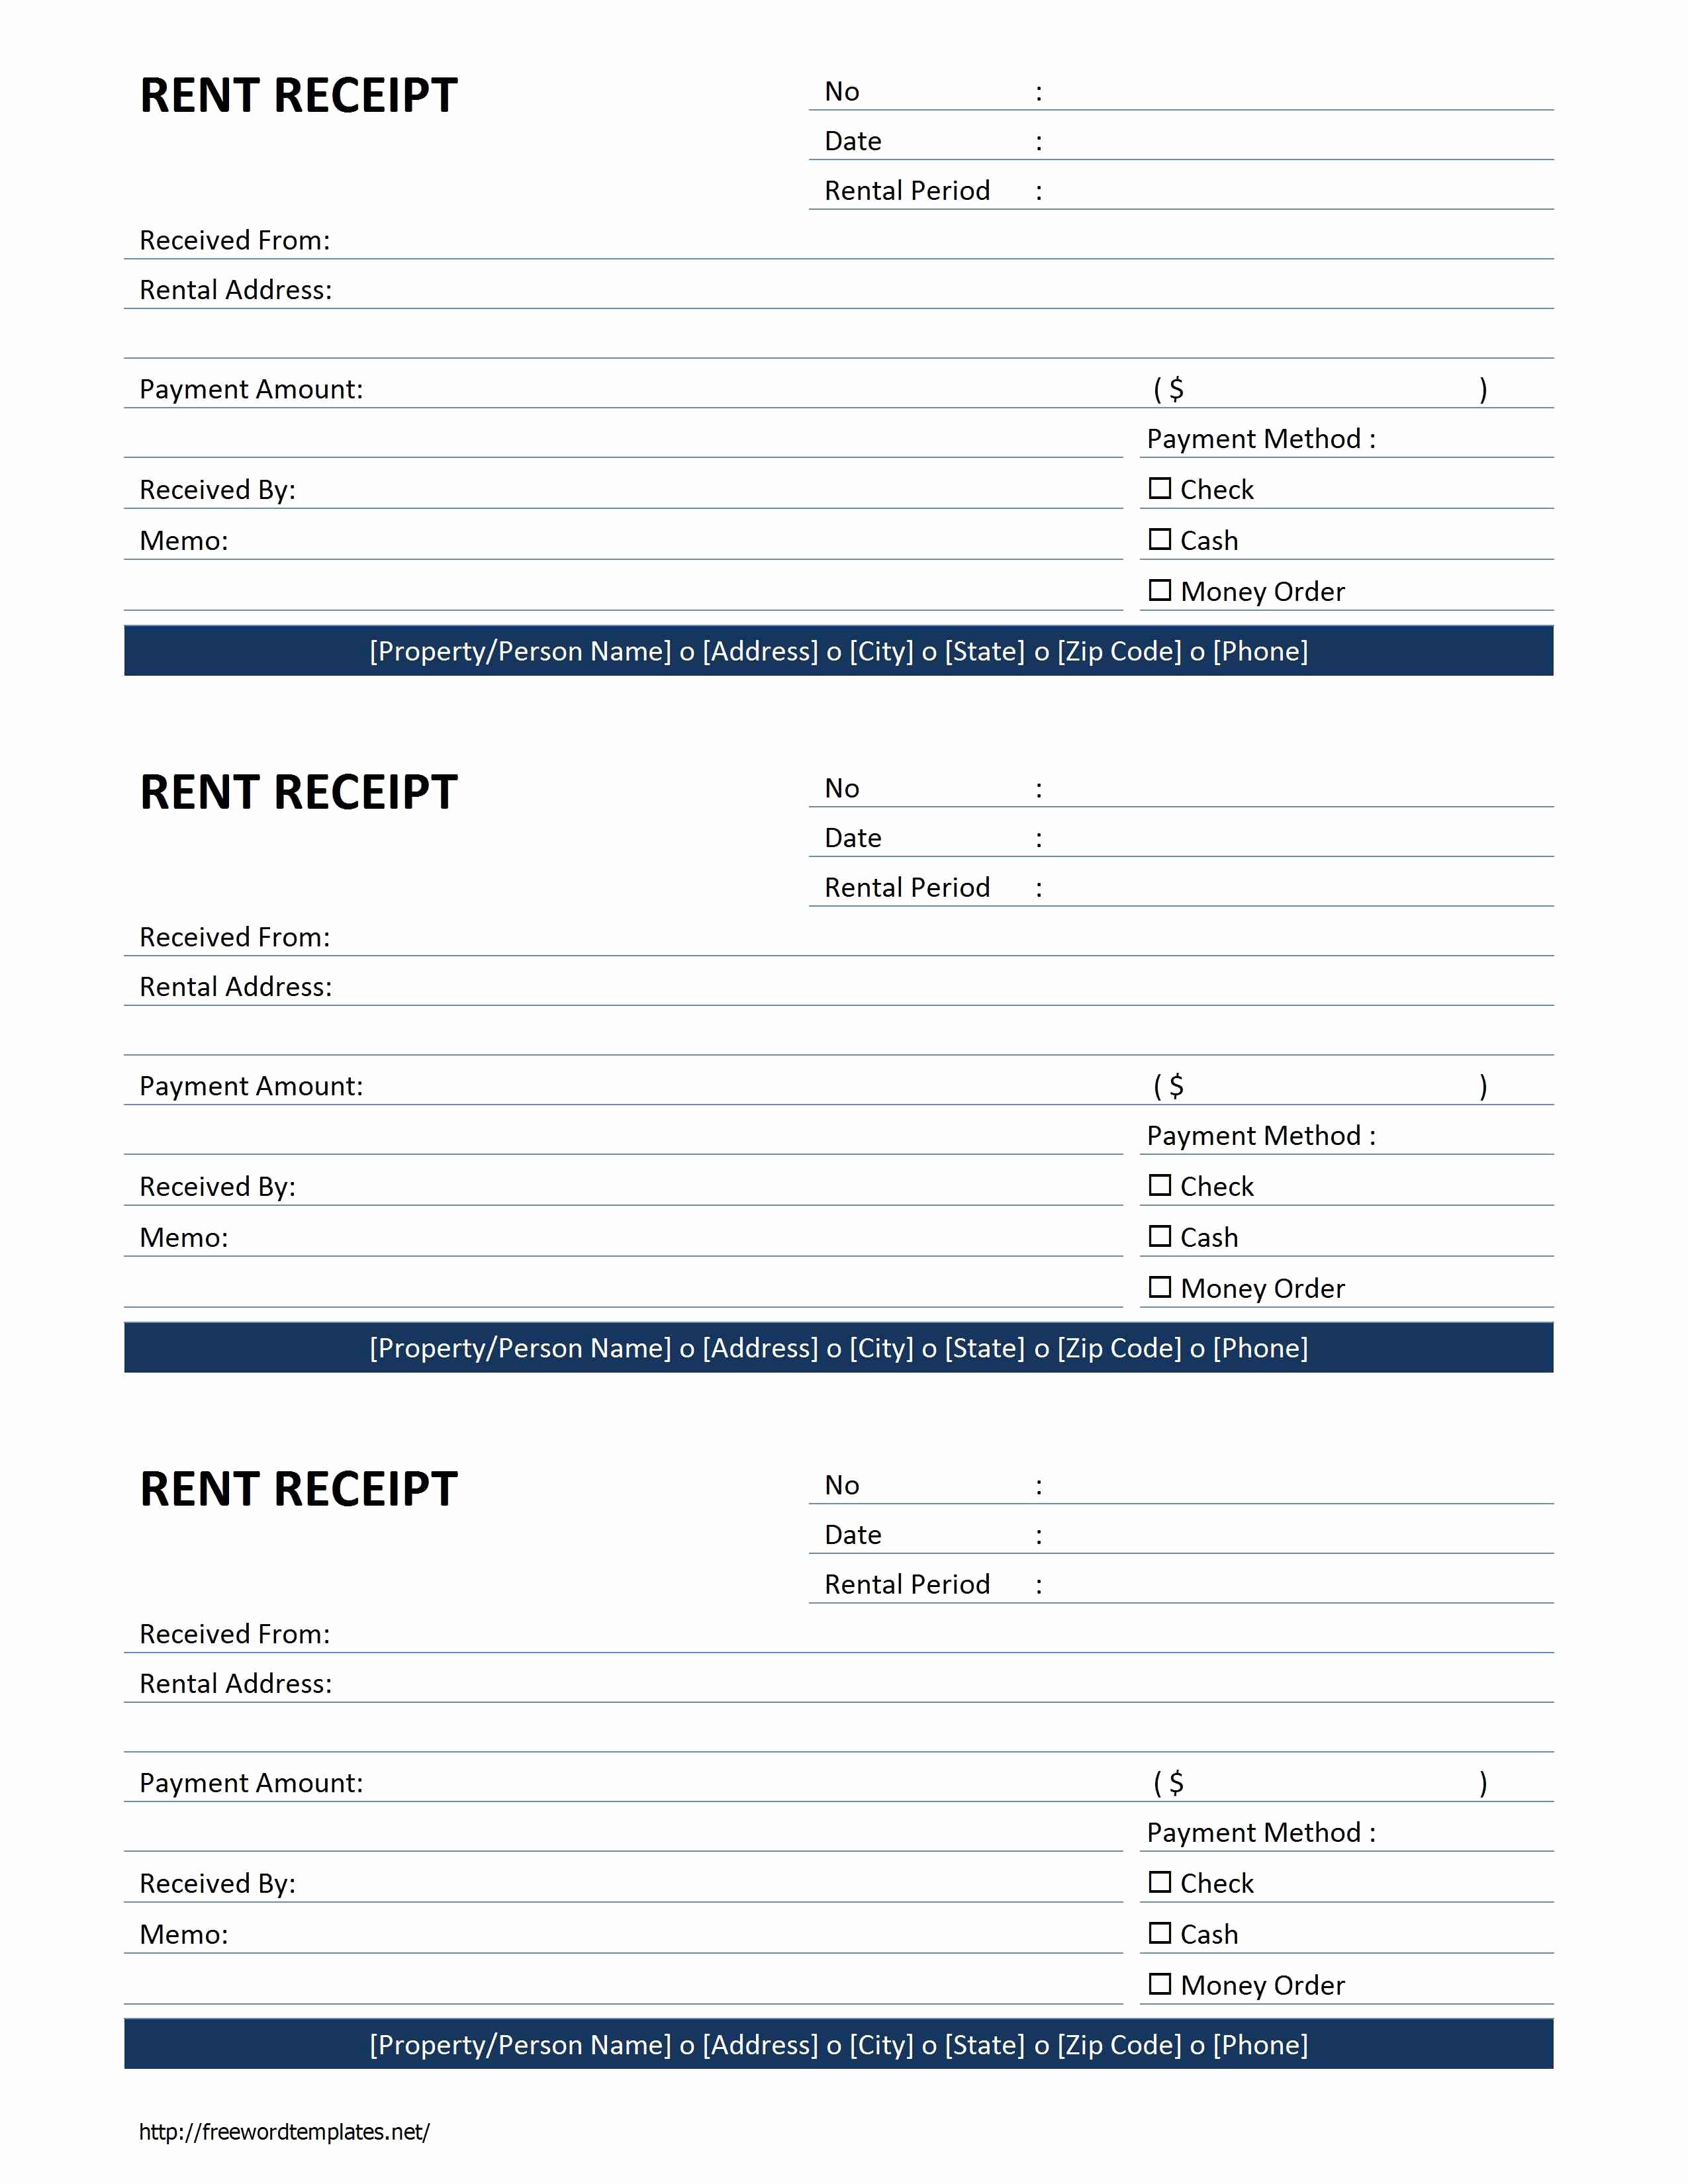 Free Rent Receipt form Best Of Free Rent Receipt Free Printable Documents